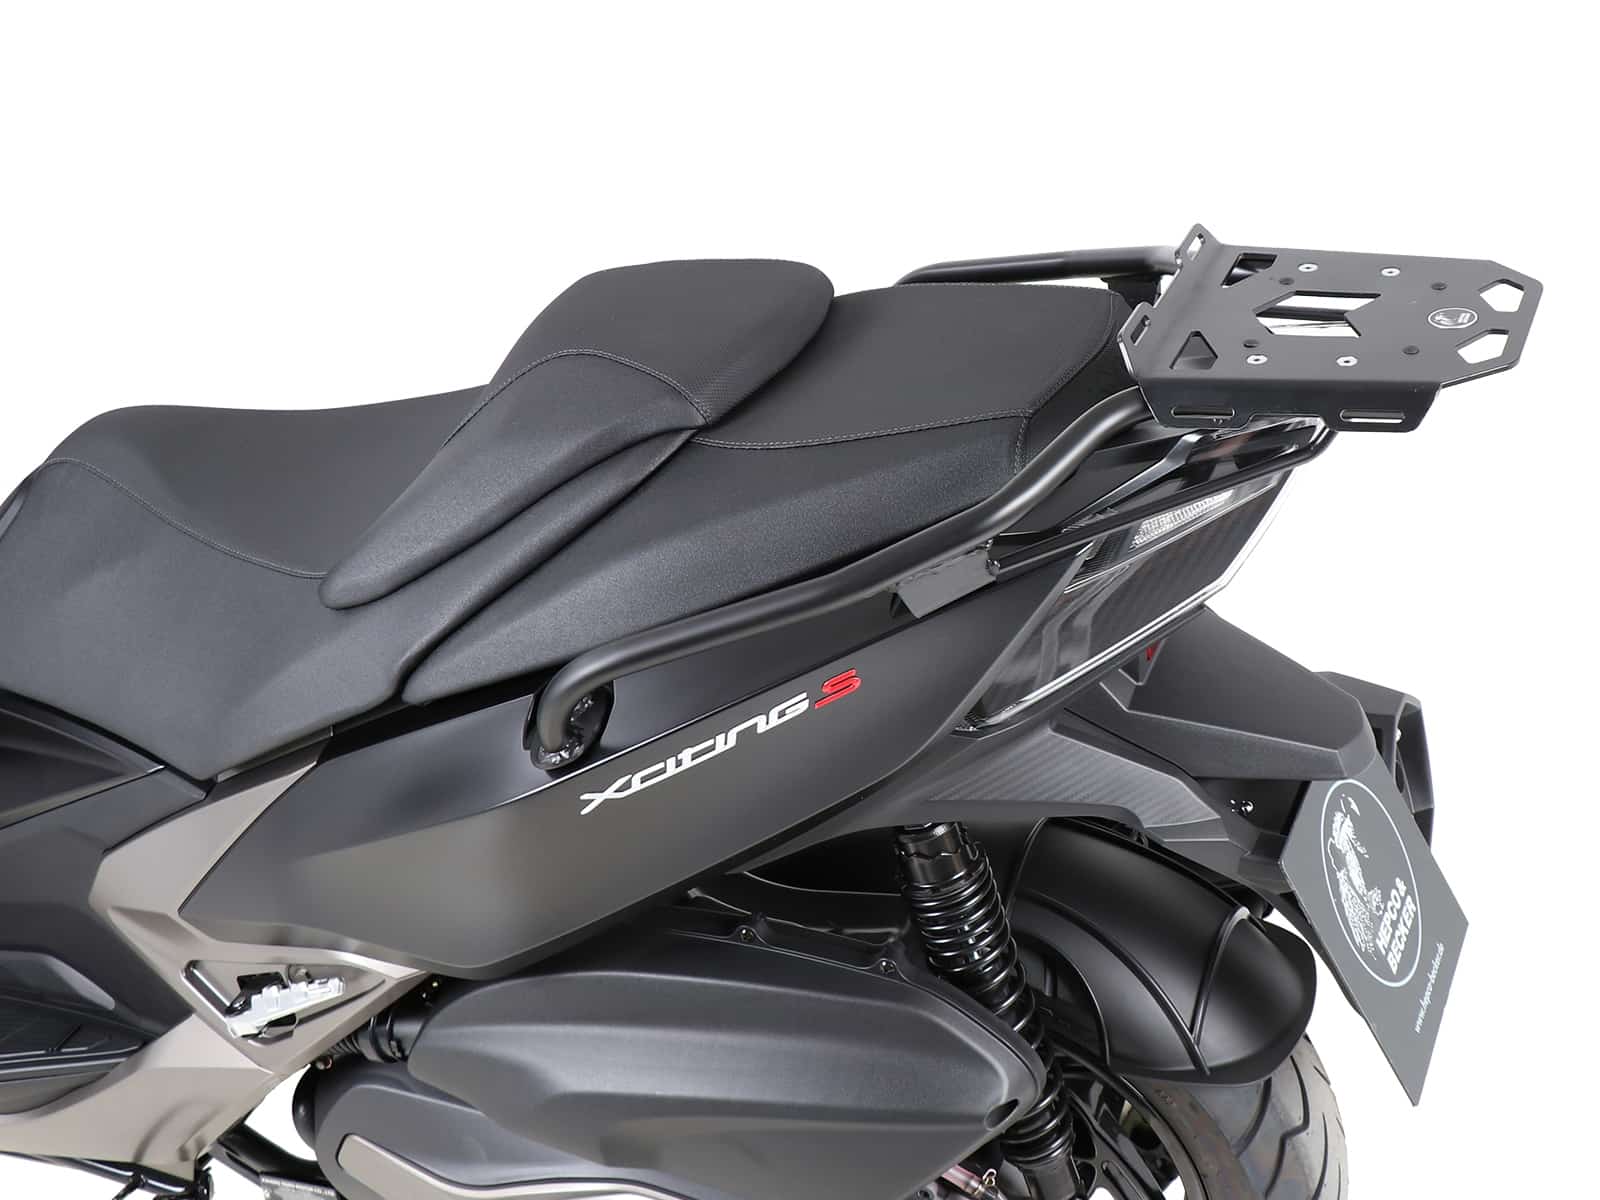 Minirack soft luggage rear rack for Kymco Xciting S 400i ABS (2018-)